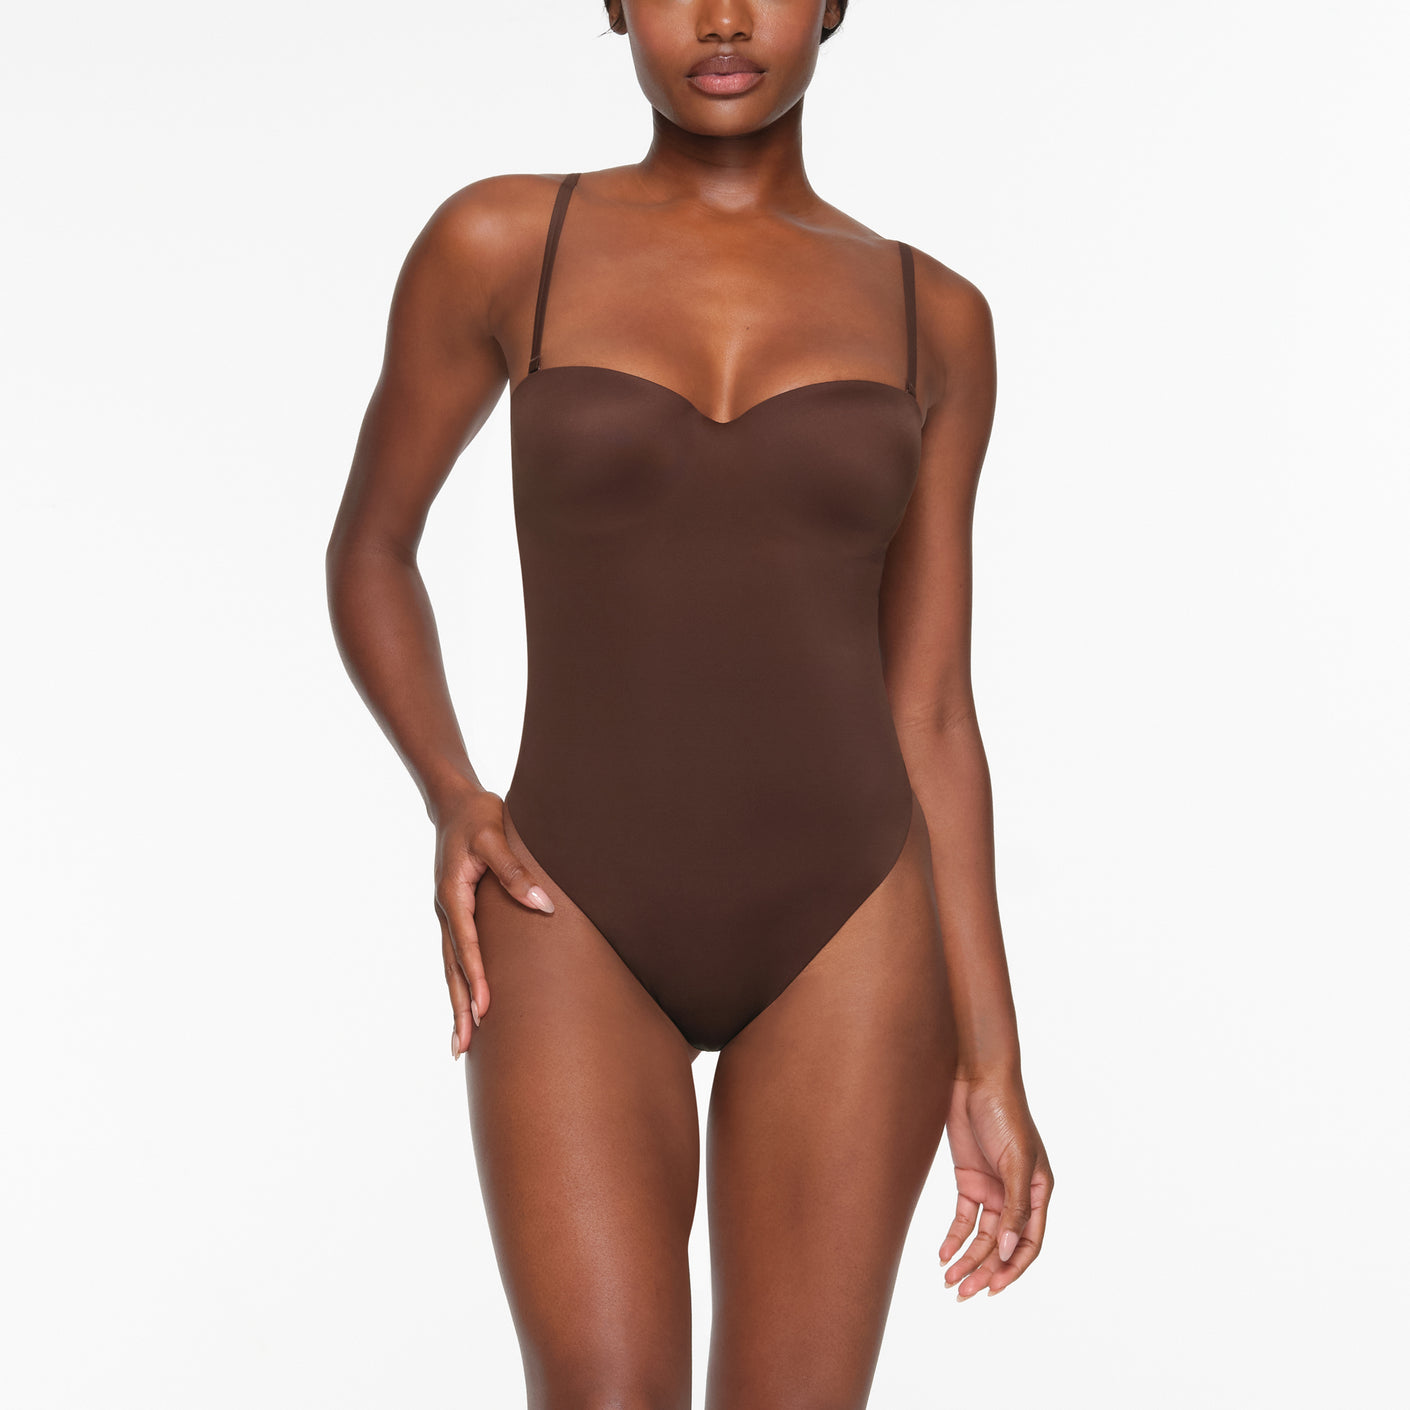 Skims fits everybody square neck bodysuit cocoa XL NWT $88 retail